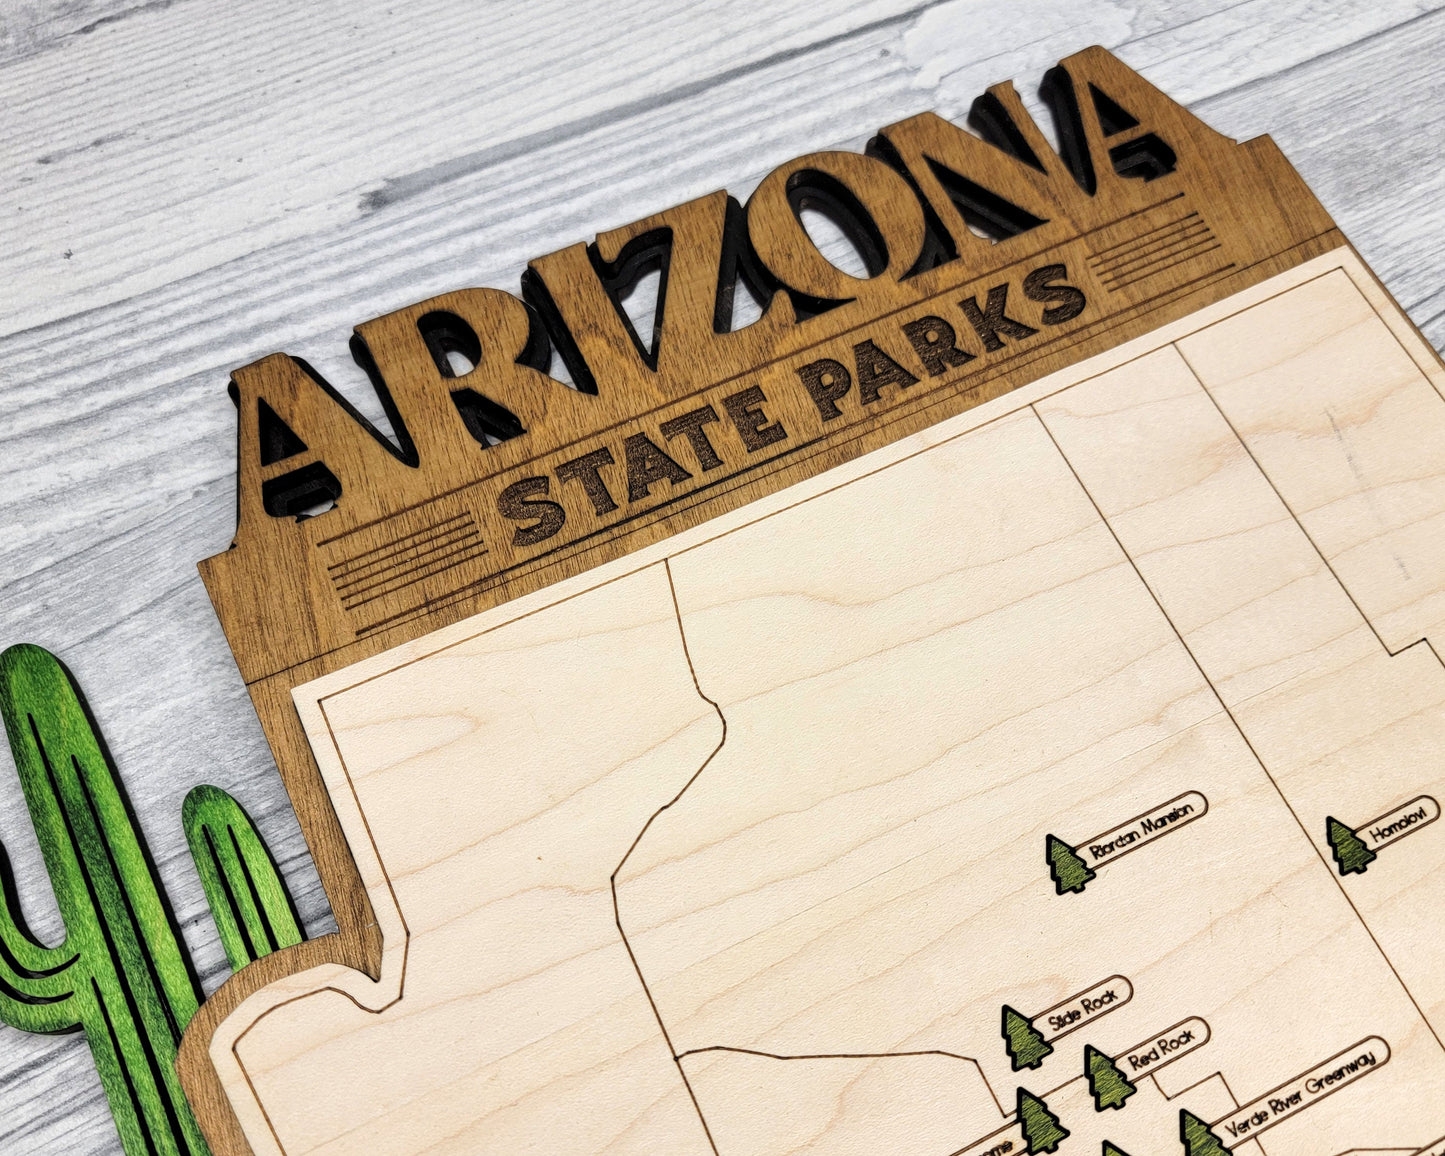 The Arizona State Park Map - Custom and Non Customizable Options - SVG, PDF File Download - Tested in Lightburn and Glowforge & Xtool